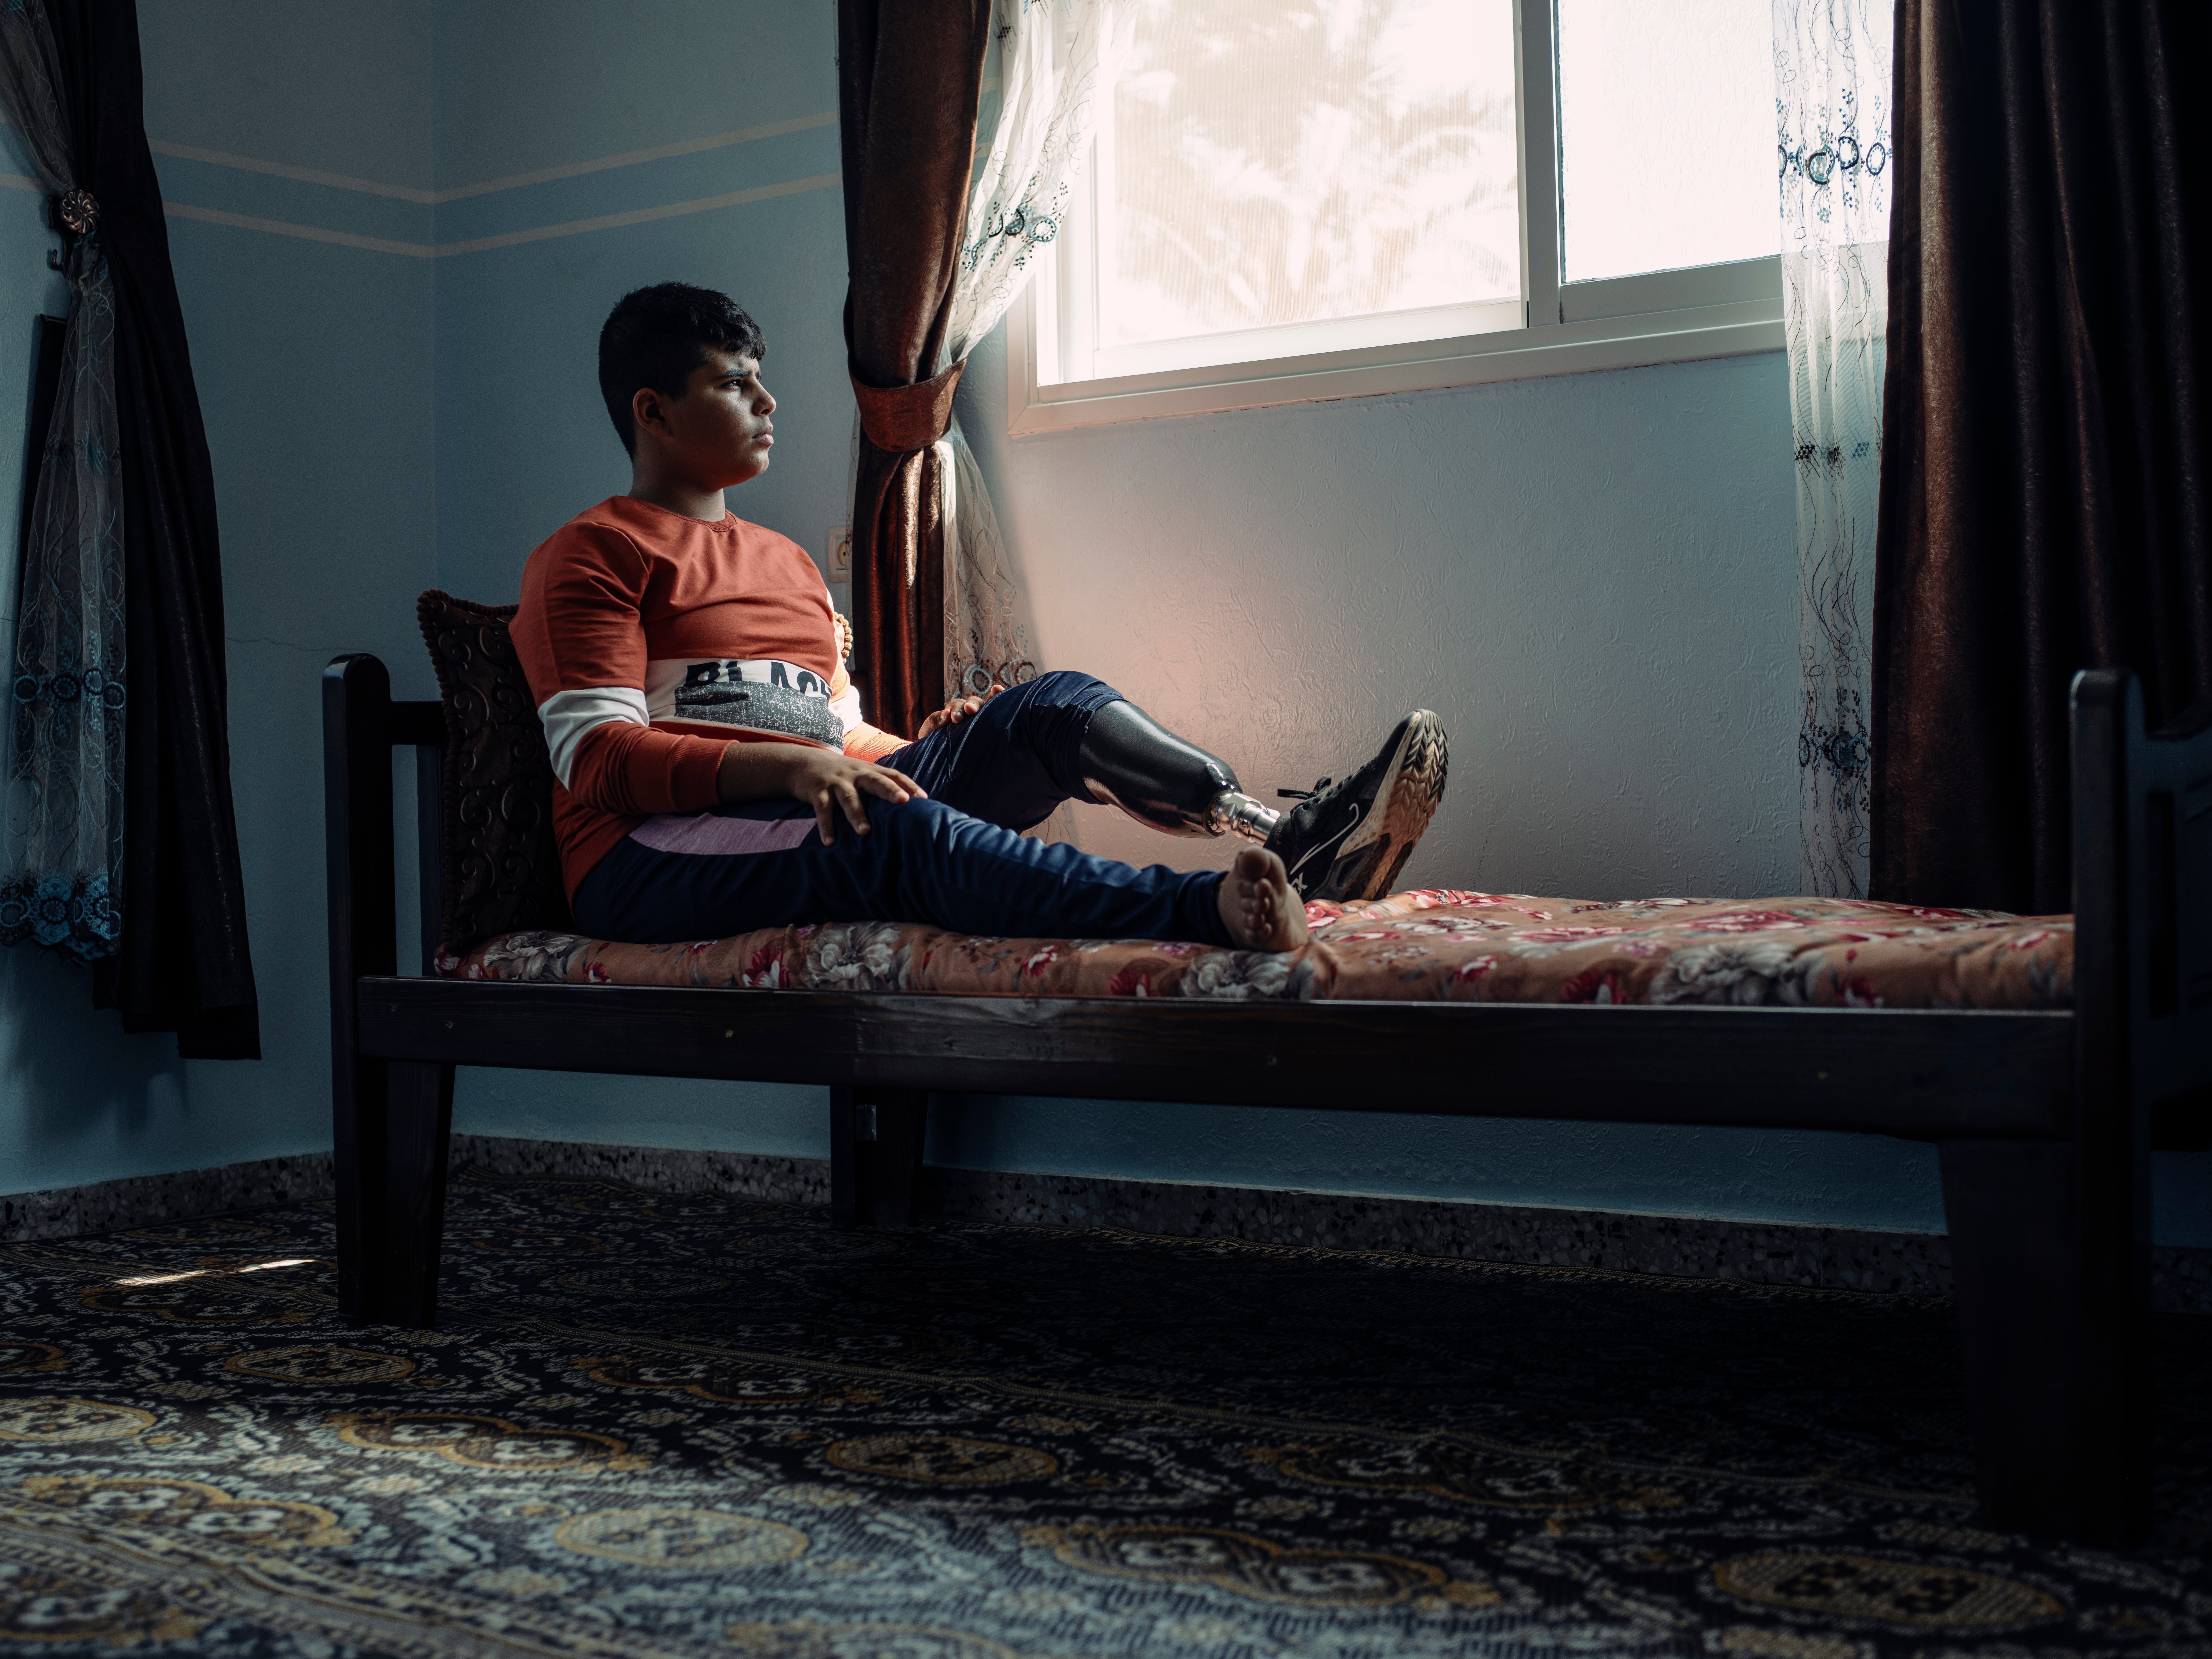 Mohammed, who lives in the Bedouin area of Mousadar in Gaza, was watching television on 12 November 2019 when a tank shell was fired directly at his home. He lost his left leg in the blast